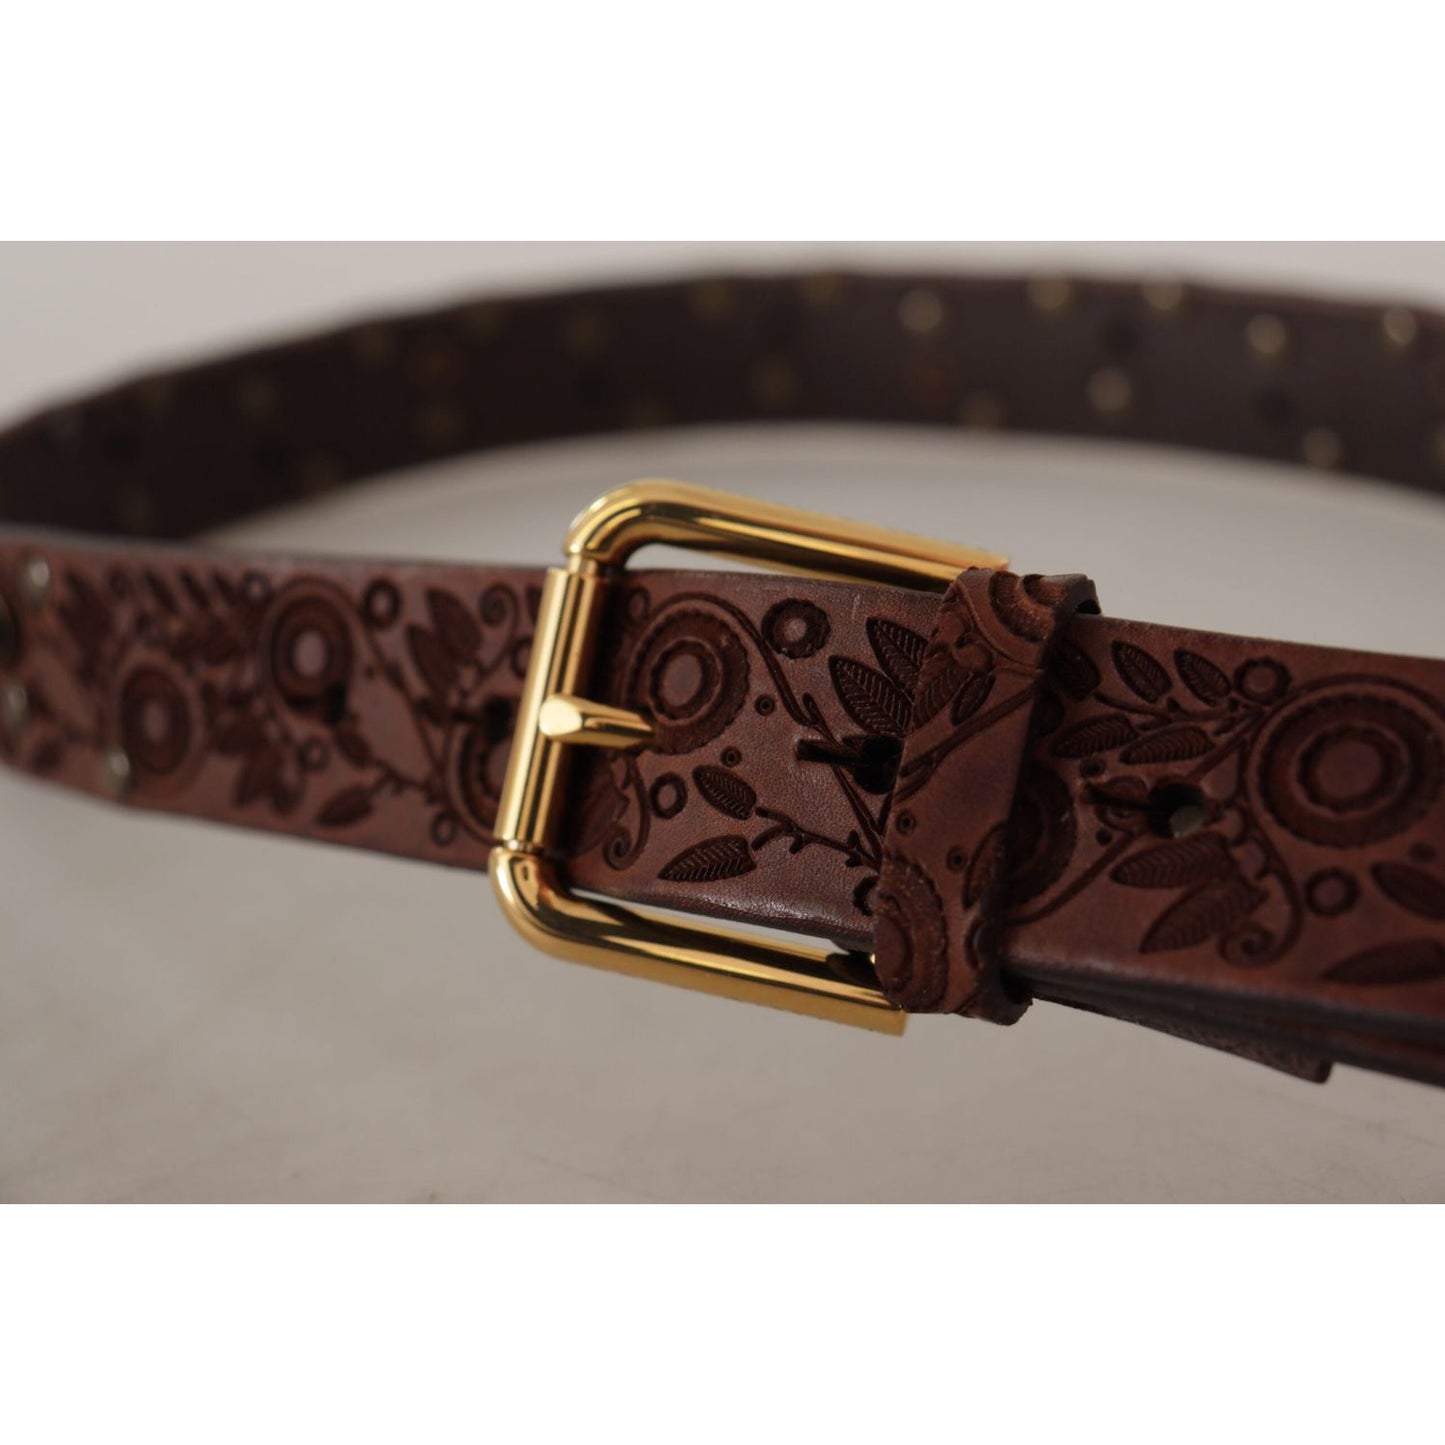 Dolce & Gabbana Elegant Leather Belt with Engraved Buckle brown-calf-leather-embossed-gold-metal-buckle